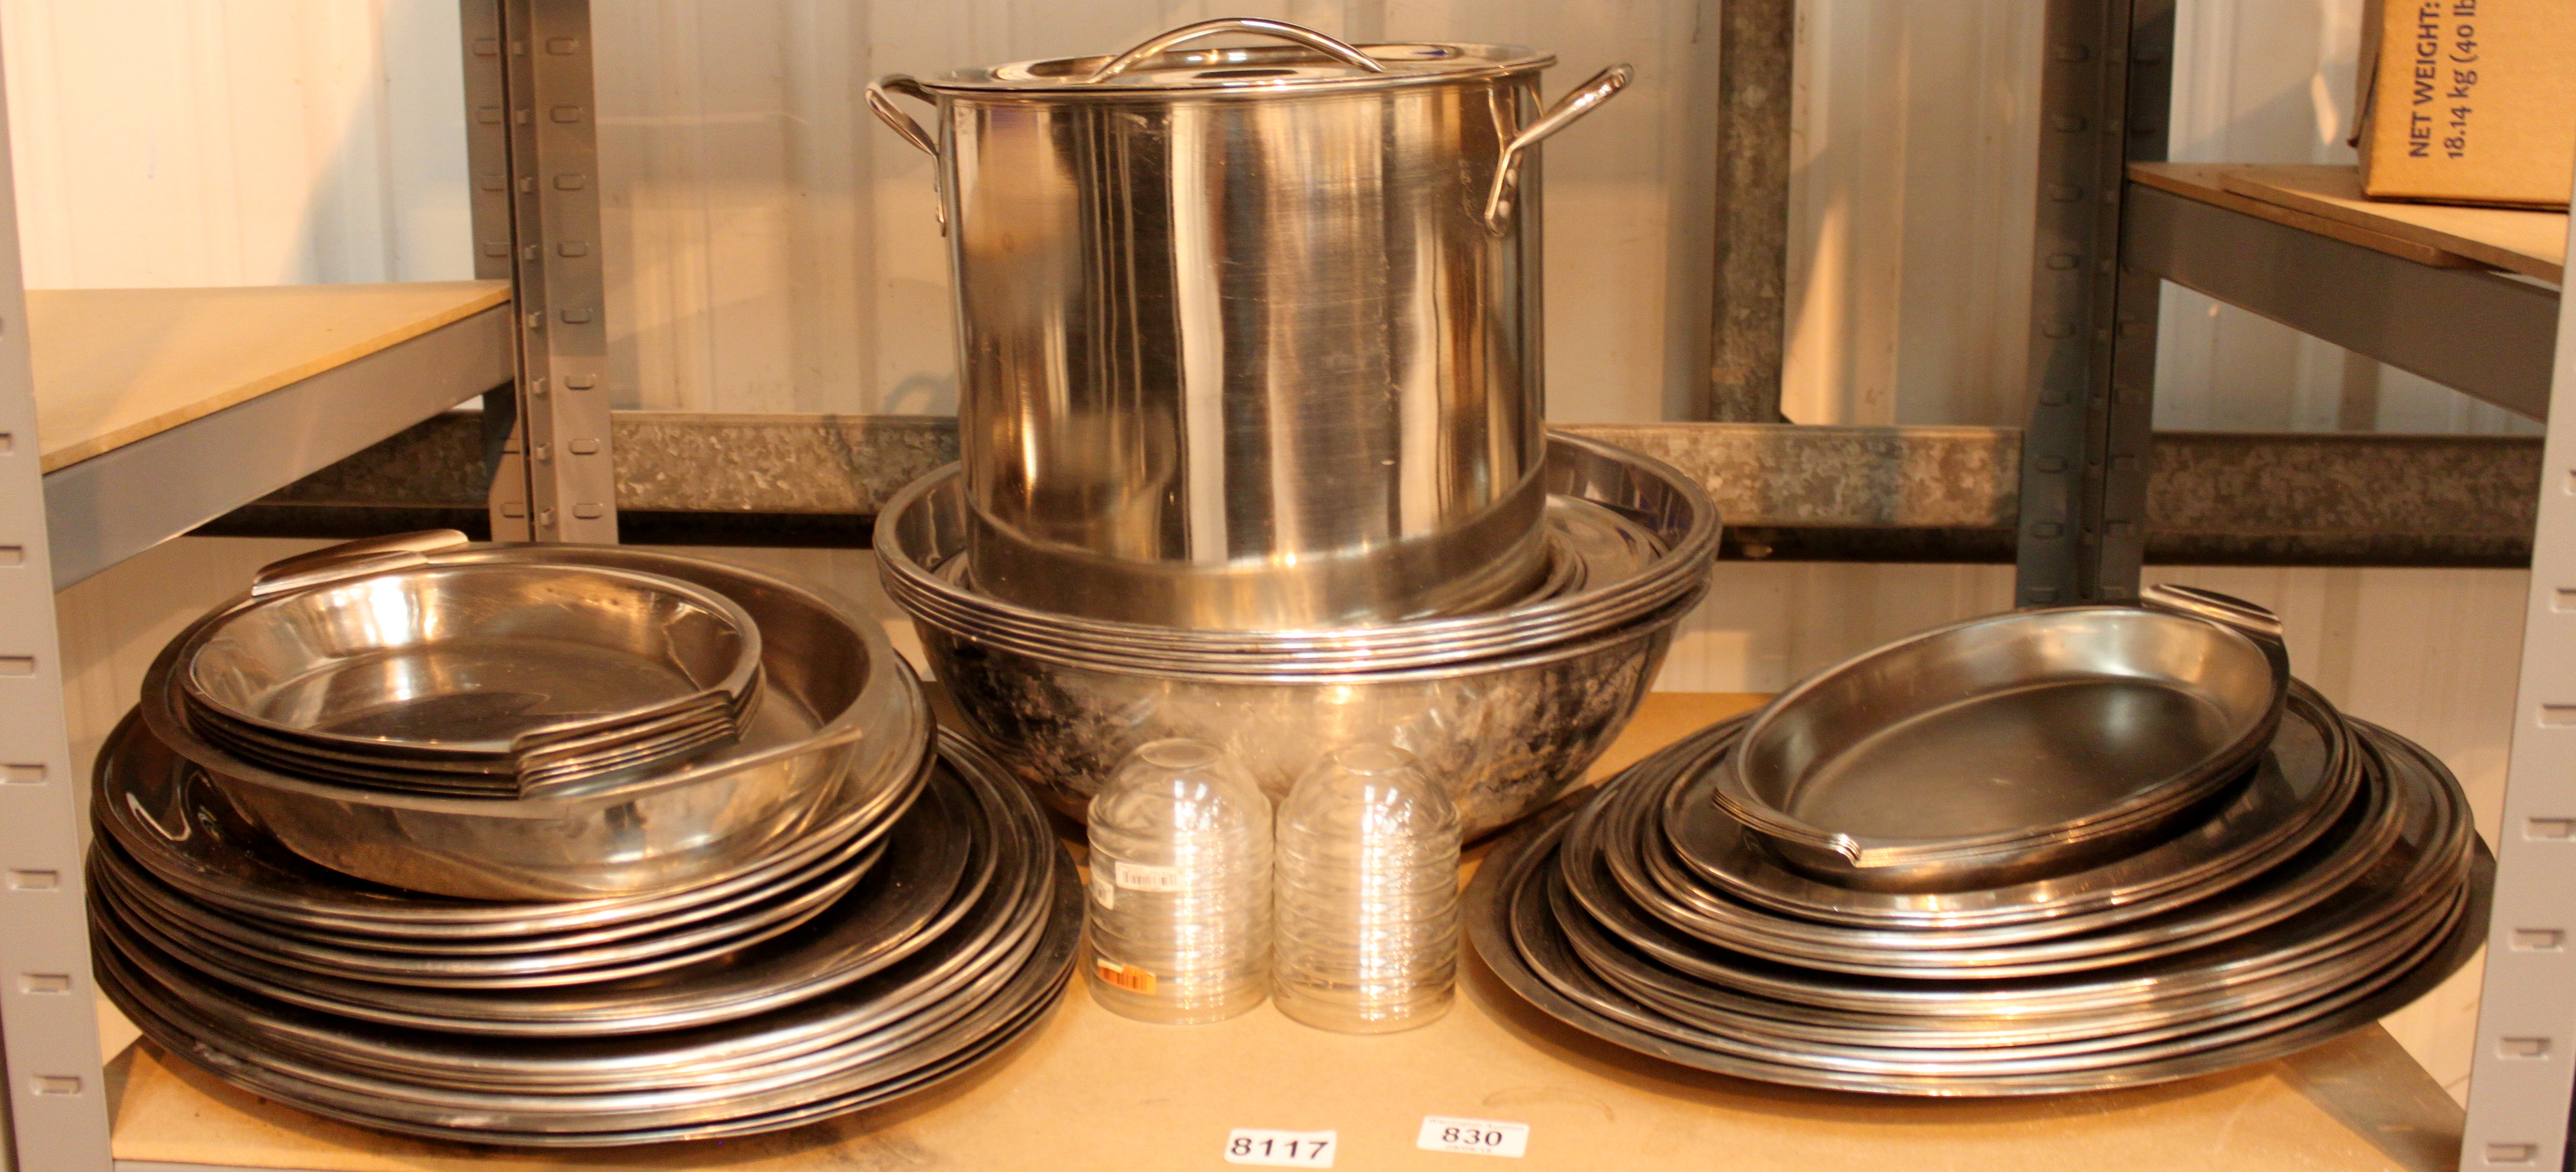 Large quantity of stainless steel catering equipment 44.